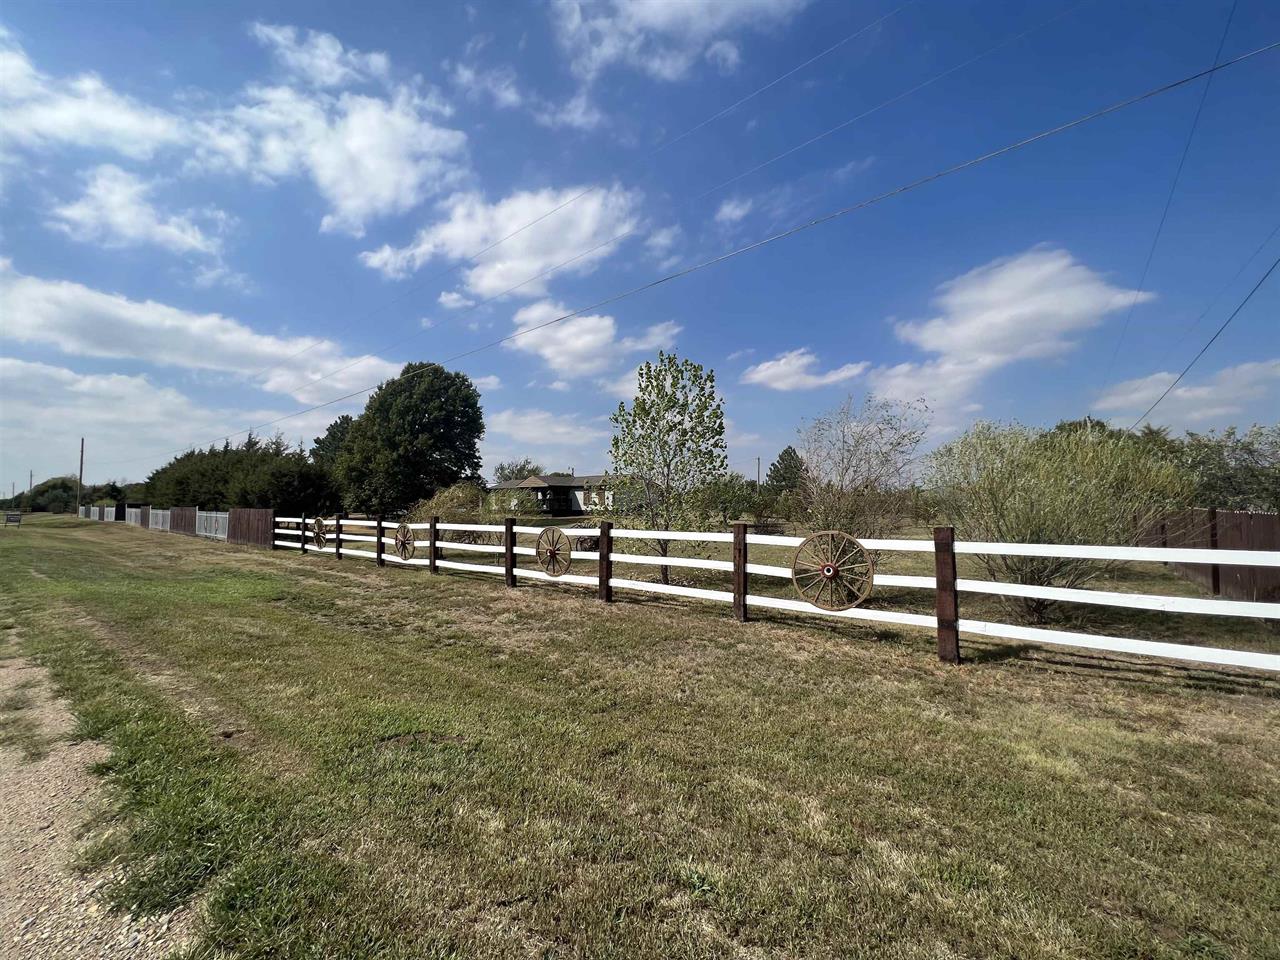 For Sale: 9124 W 82ND, Valley Center KS